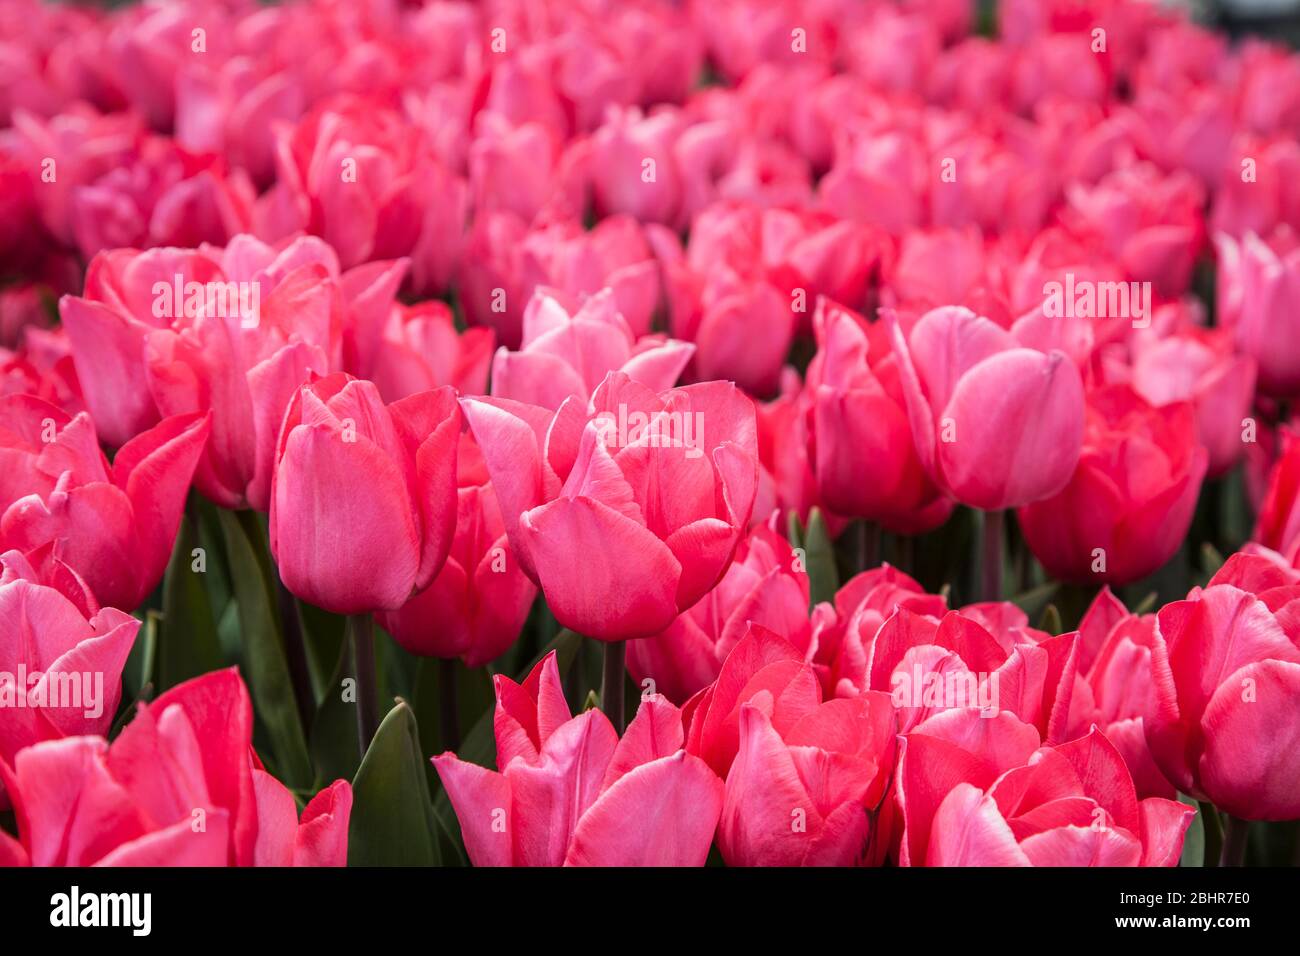 Colourful close up of Pink Tulips garden, Mercer county, New Jersey, USA, spring bulbs in border, tulips garden tulip DT 2020 Stock Photo